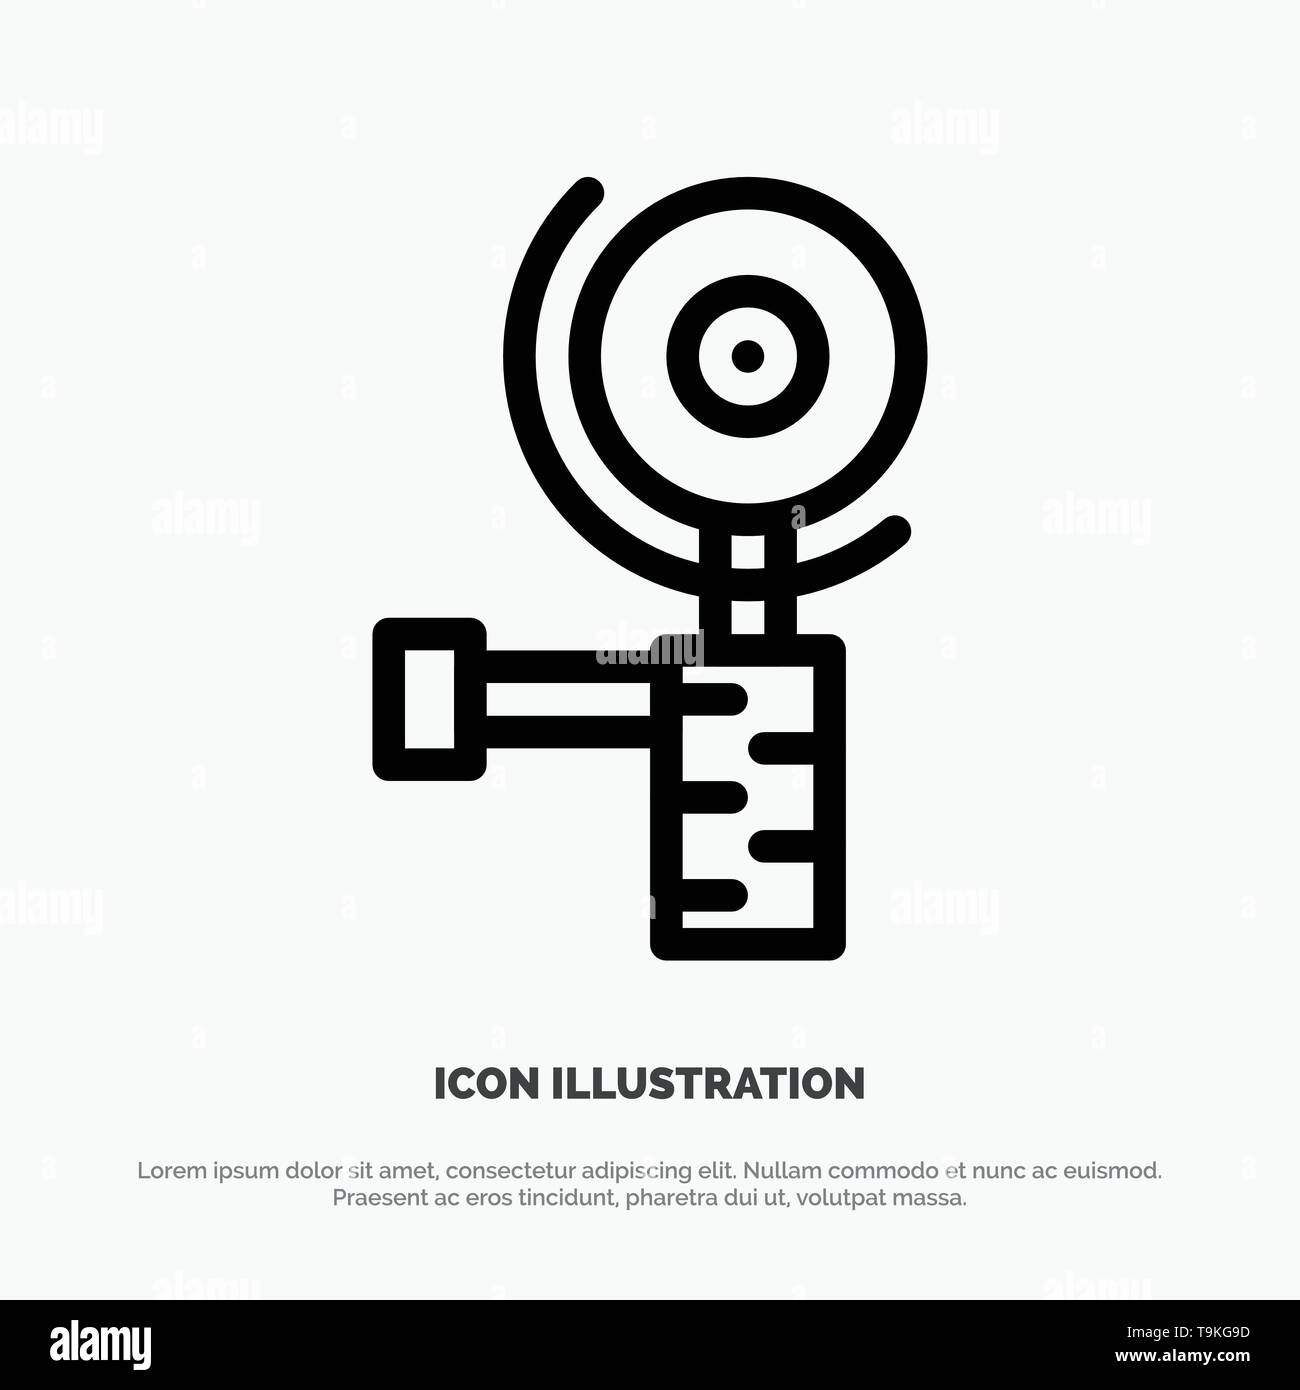 Construction, Grinder, Grinding Line Icon Vector Stock Vector